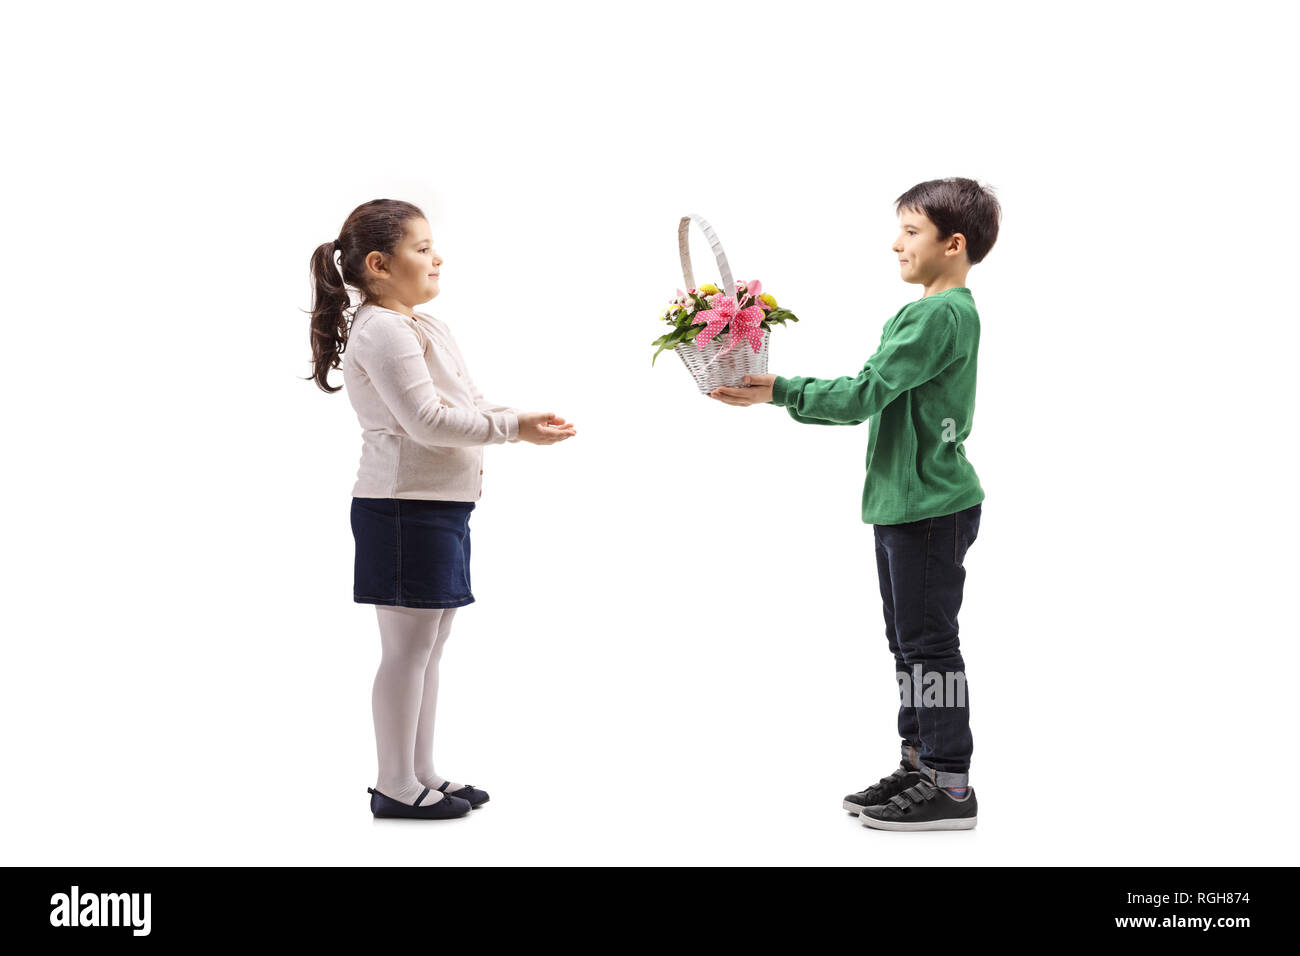 Full length shot of a little boy giving a basket with flowers to a little girl isolated on white background Stock Photo